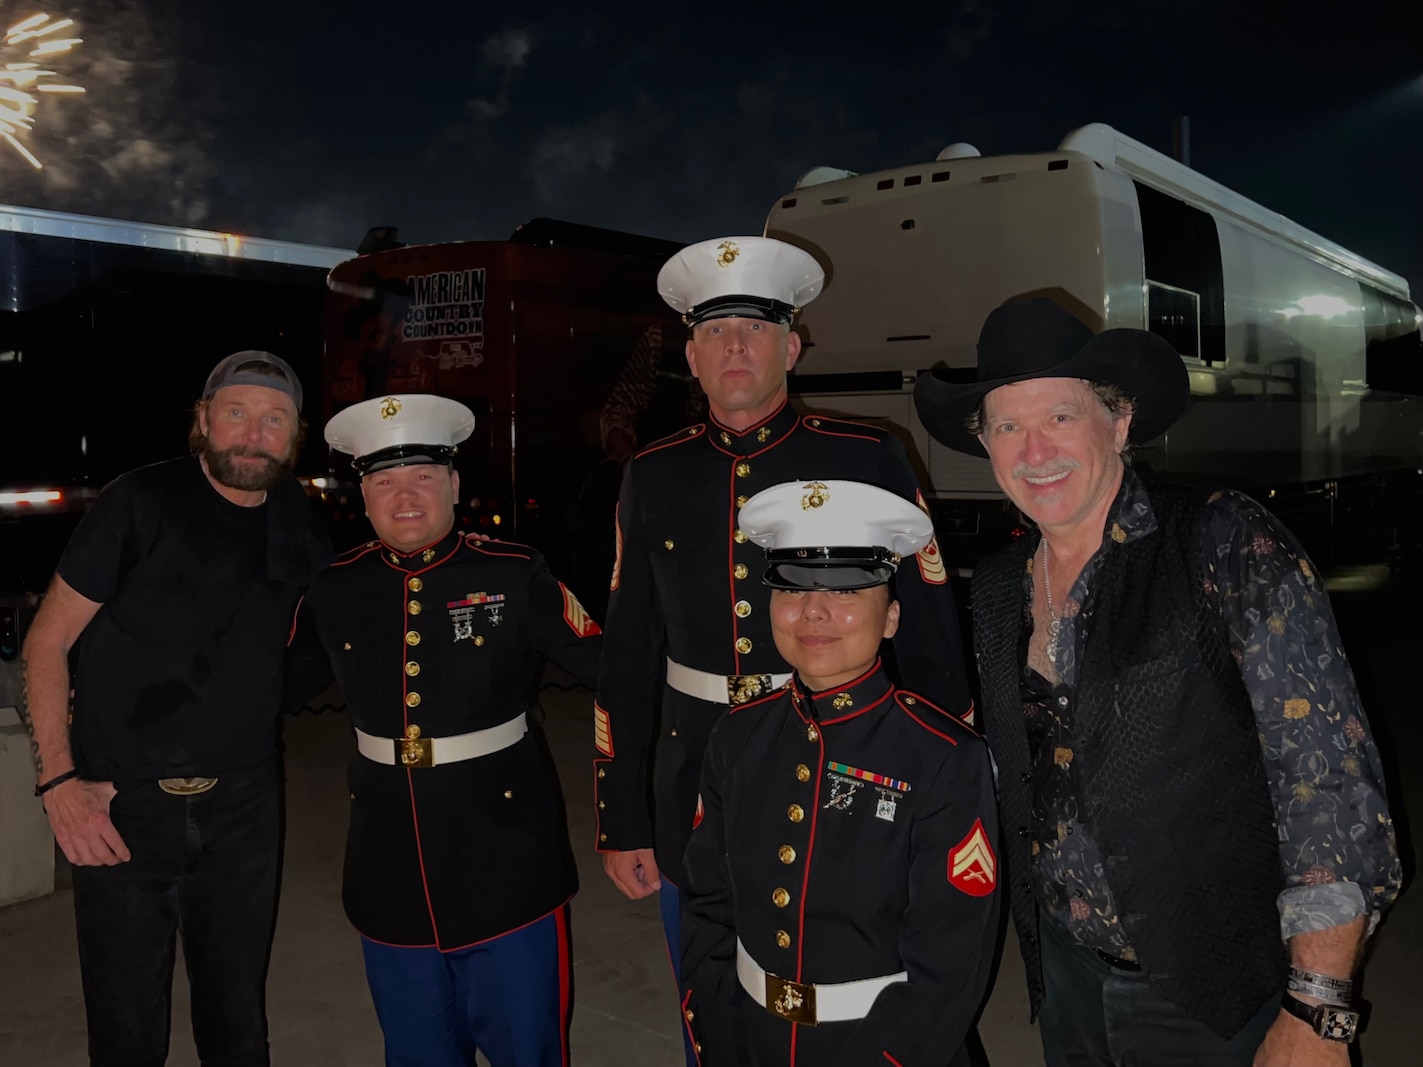 Marines from Recruiting Station Des Moines attend the Brooks and Dunn concert, at the Iowa State Fair, August 12, 2022. Master Sgt. John Harwood, Sgt. Steven Touhy and Cpl. Alejandra Martinez had to opportunity to meet the band and were honored during the veterans appreciation portion of the concert. Brooks & Dunn are an American country music duo consisting of Kix Brooks and Ronnie Dunn, both of whom are vocalists and songwriters.